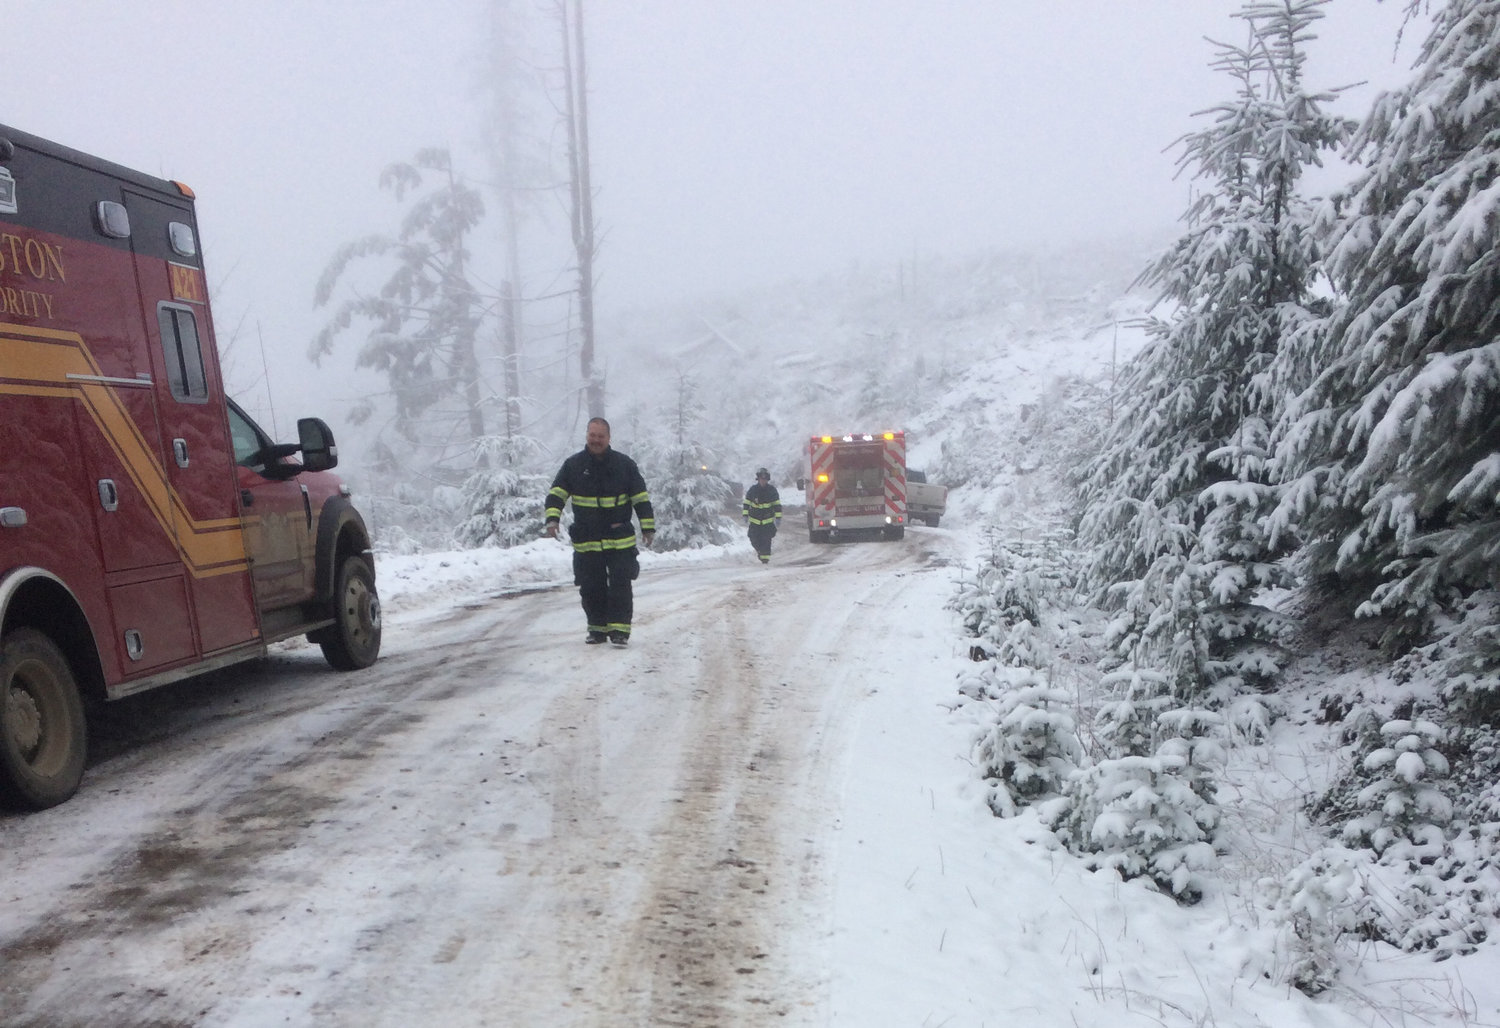 The incident occurred about 15 miles up the Skookumchuck Ridge. From first reports at 10:51 a.m. on Jan. 9, it took first responders about an hour to maneuver the snow-packed logging roads.